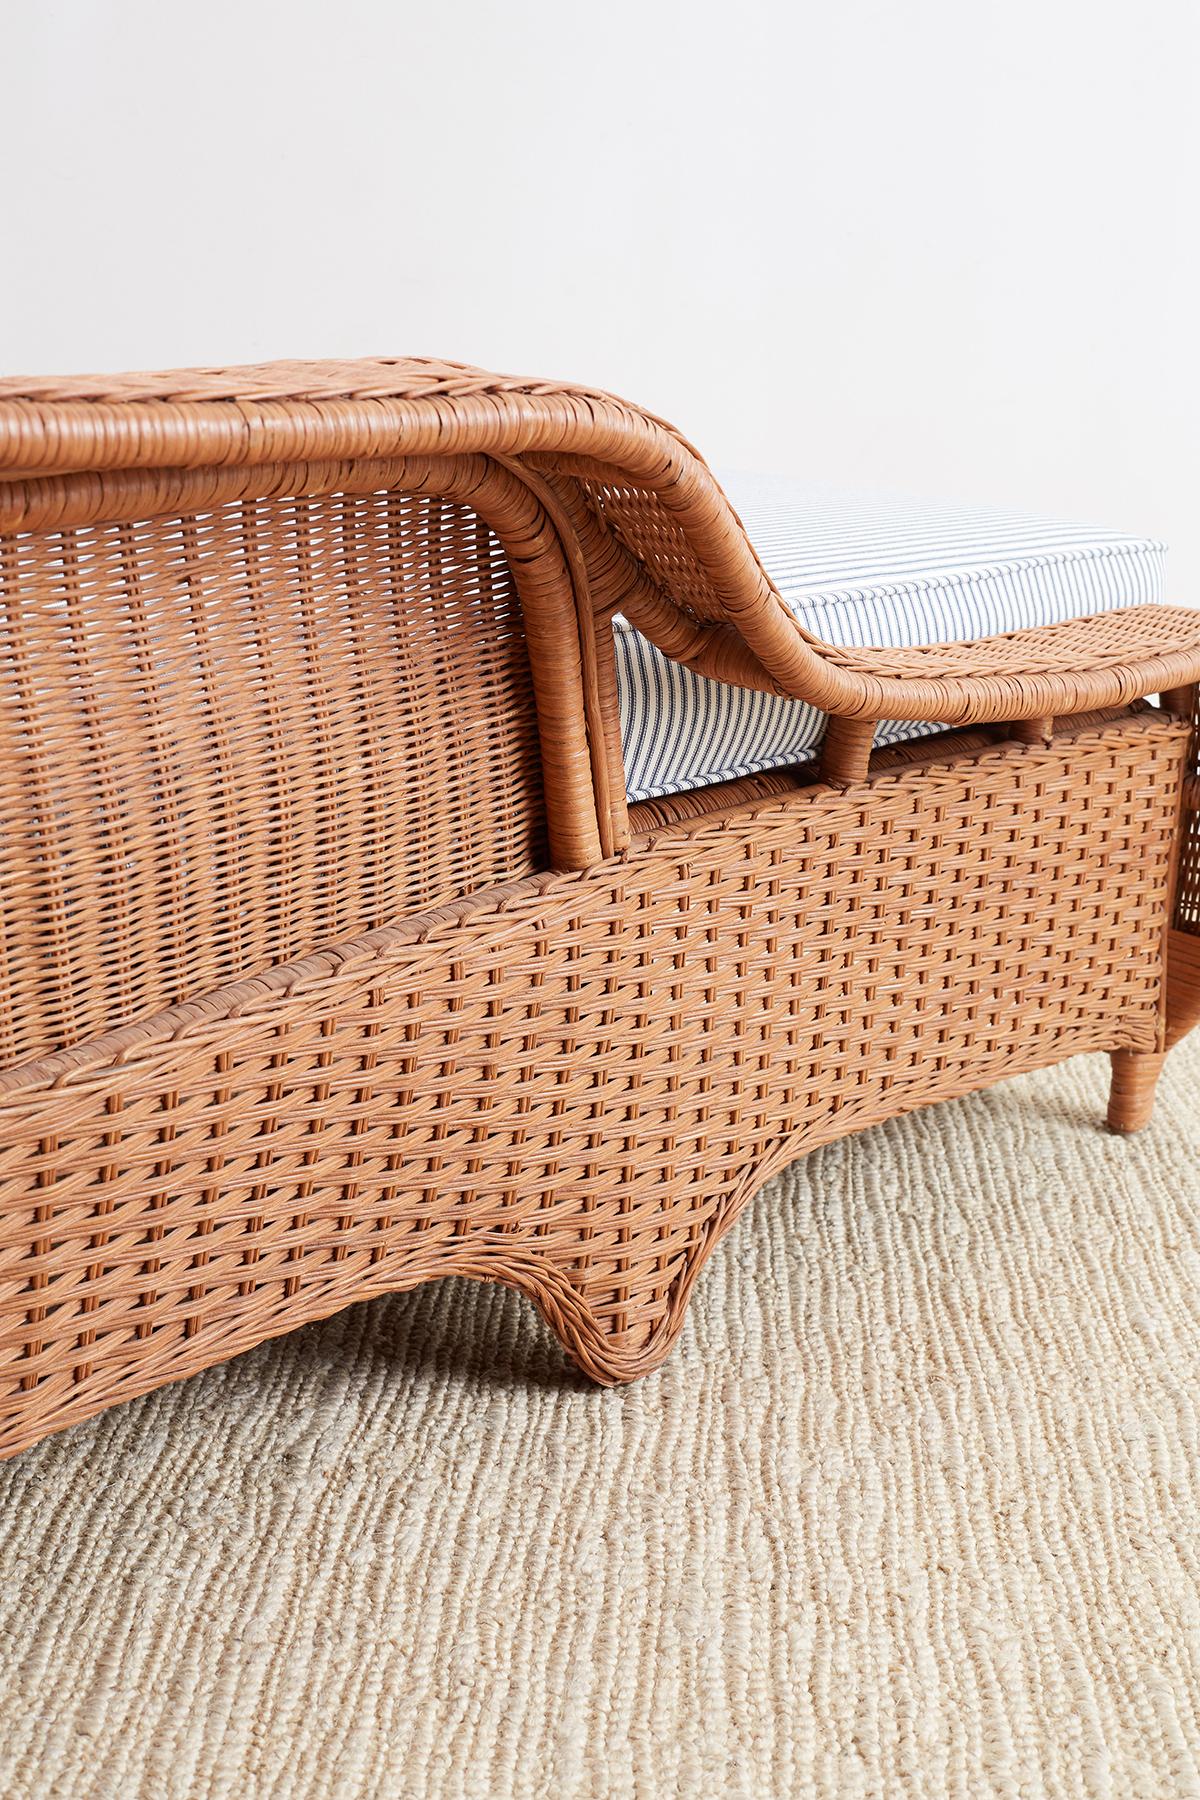 French Style Wicker Chaise Longue with Waverly Ticking Stripe Upholstery 11